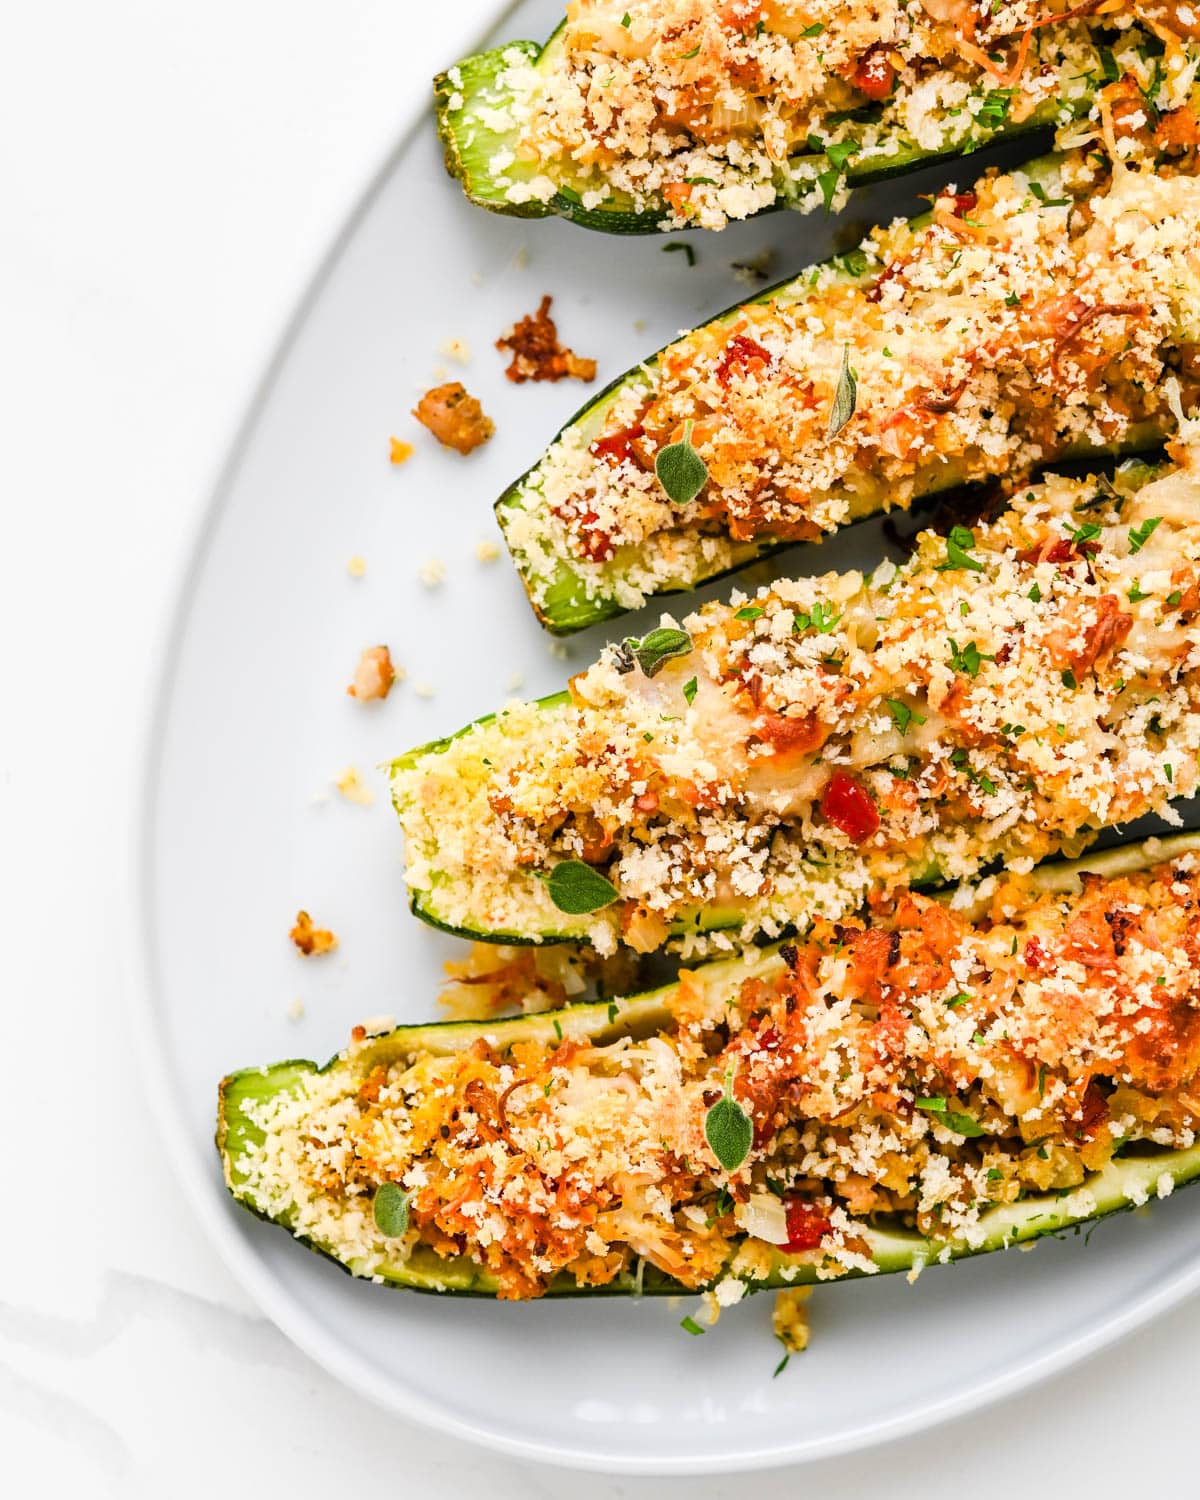 A platter of zucchini boats with Italian sausage and panko breadcrumbs.